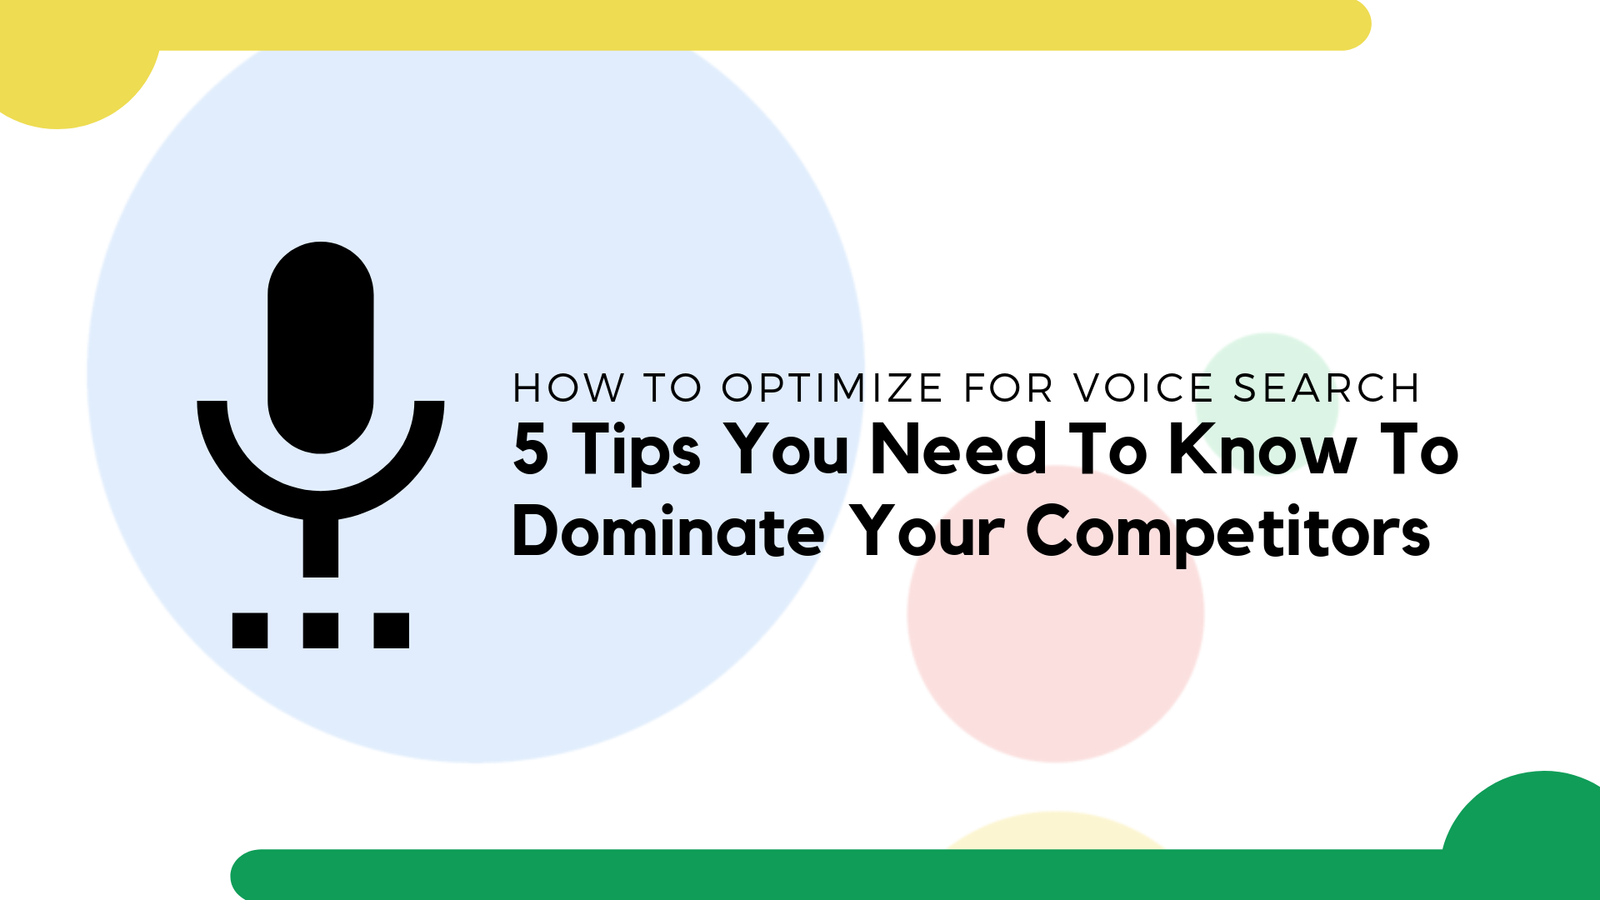 Voice Search Optimization: 5 Tips You Need To Know To Dominate Your Competitors